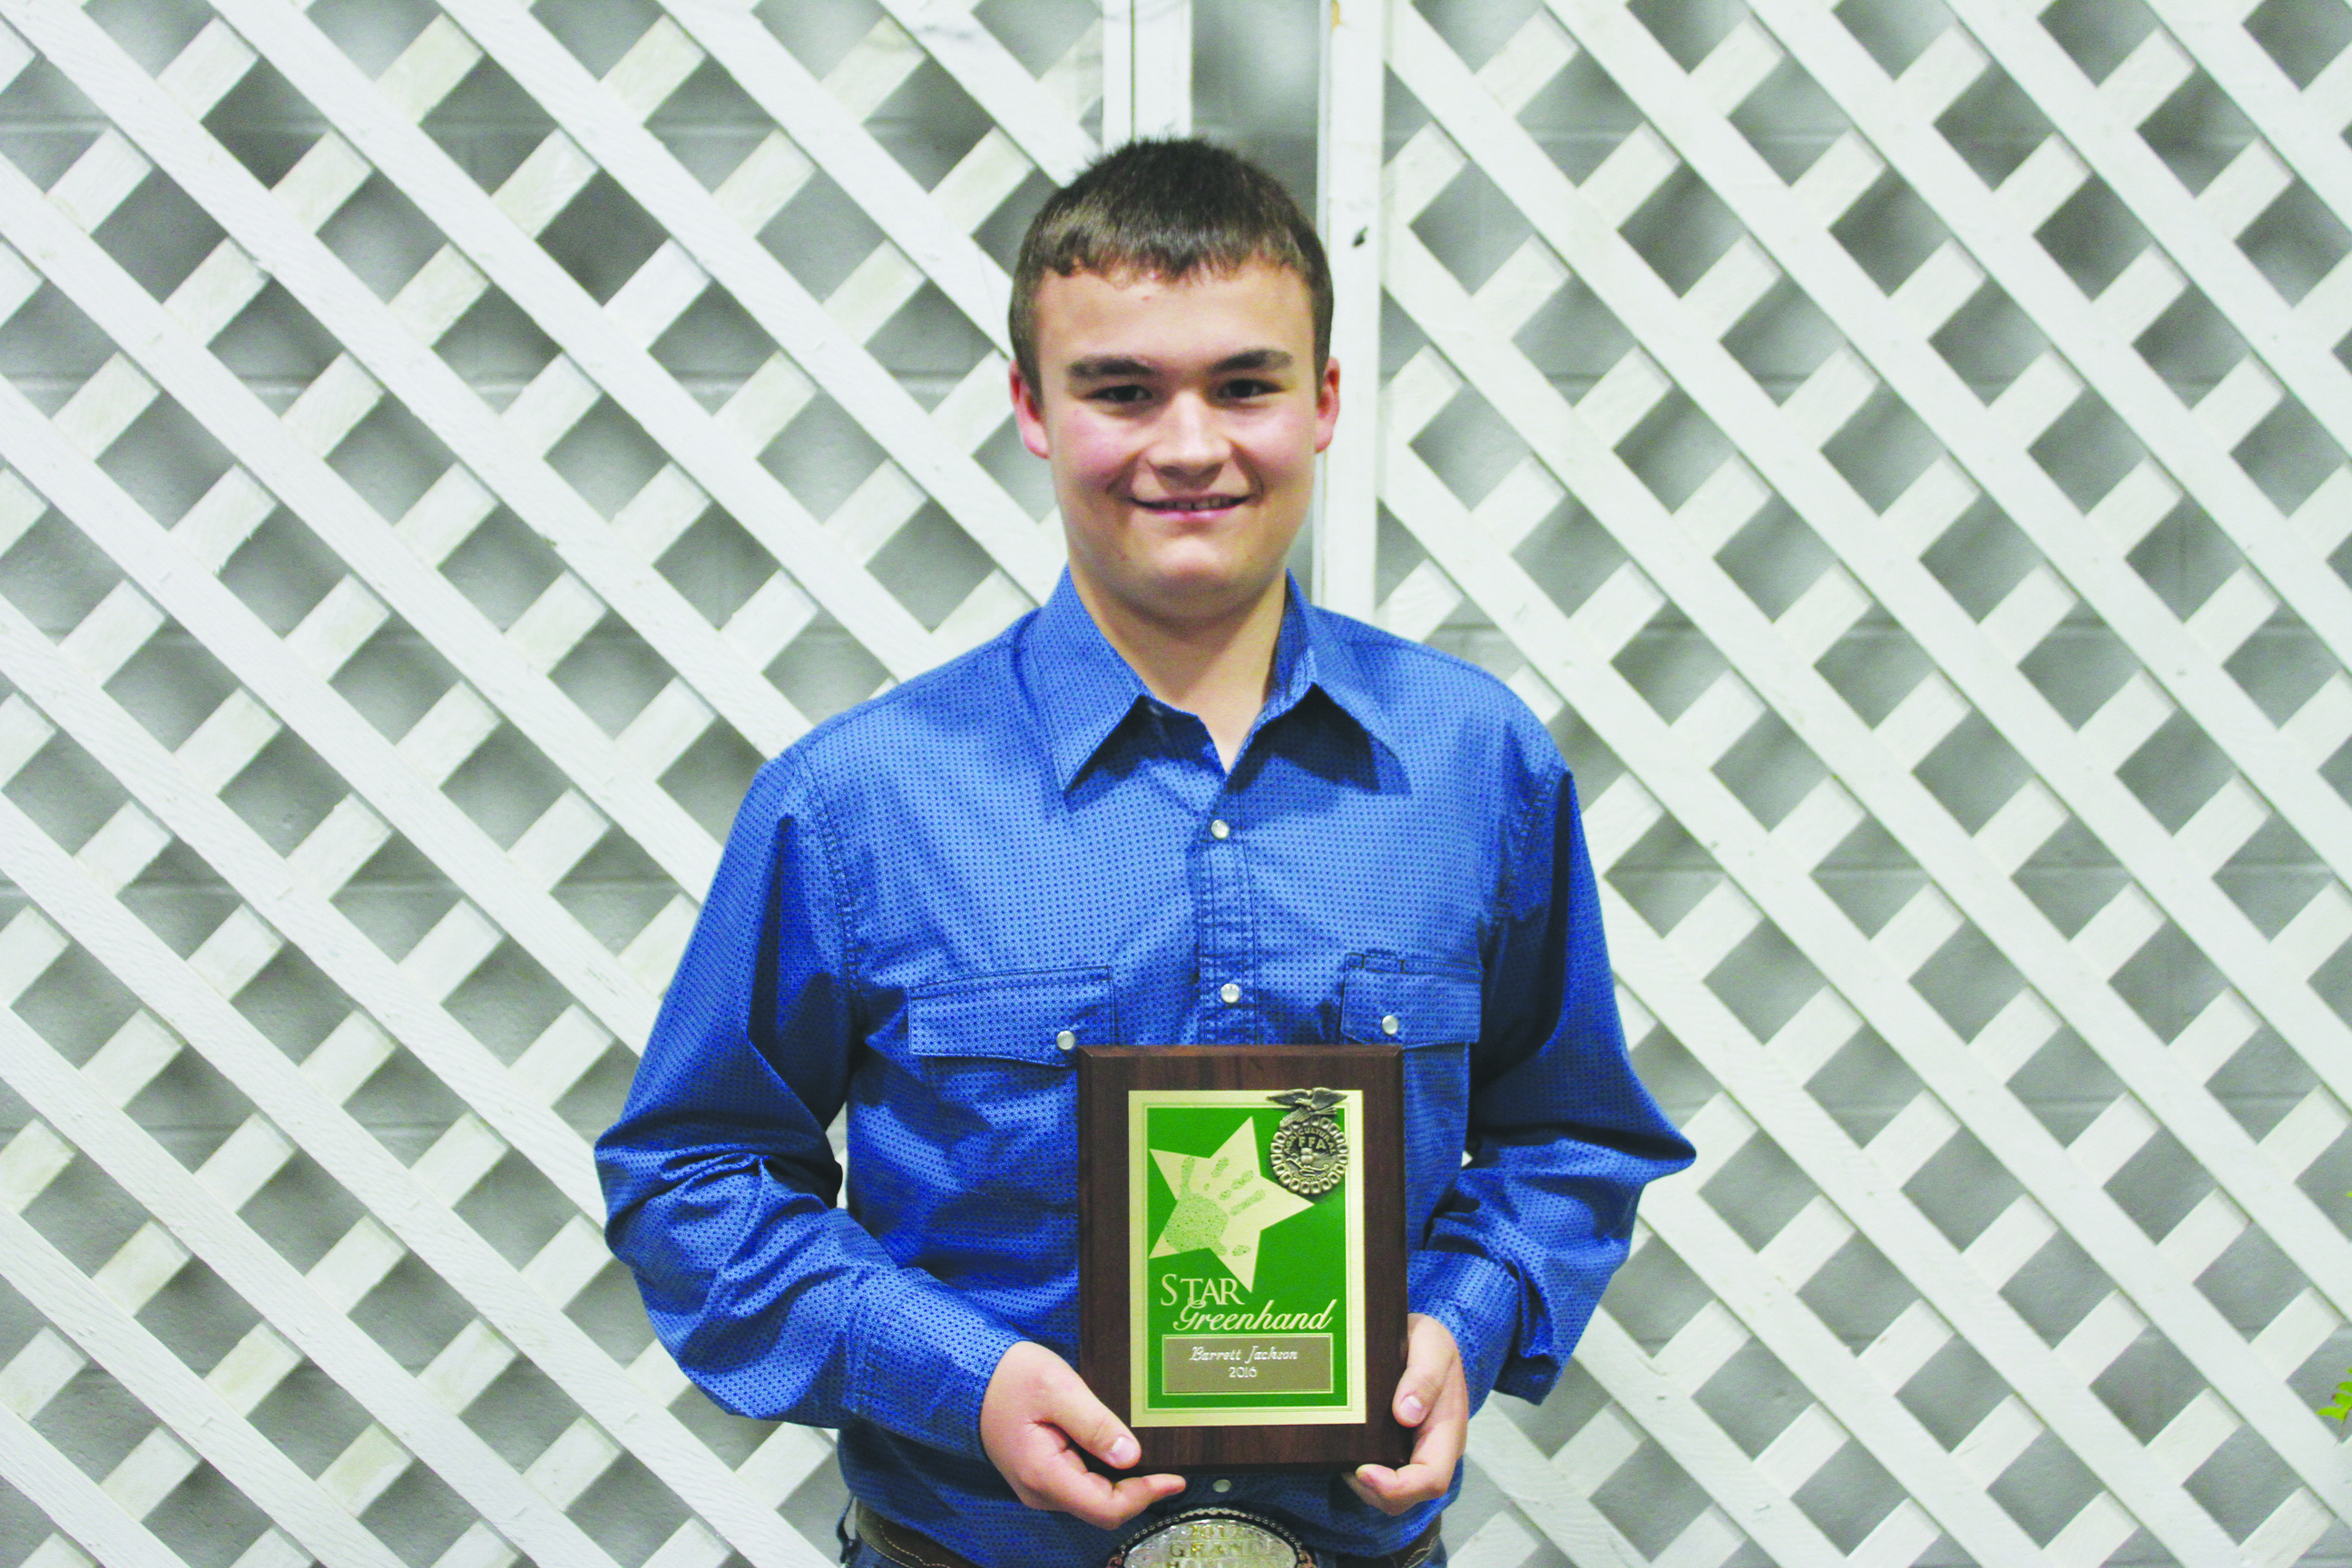 Freshman Barrett Jackson was awarded the Star Greenhand award for being the most outstanding freshman.